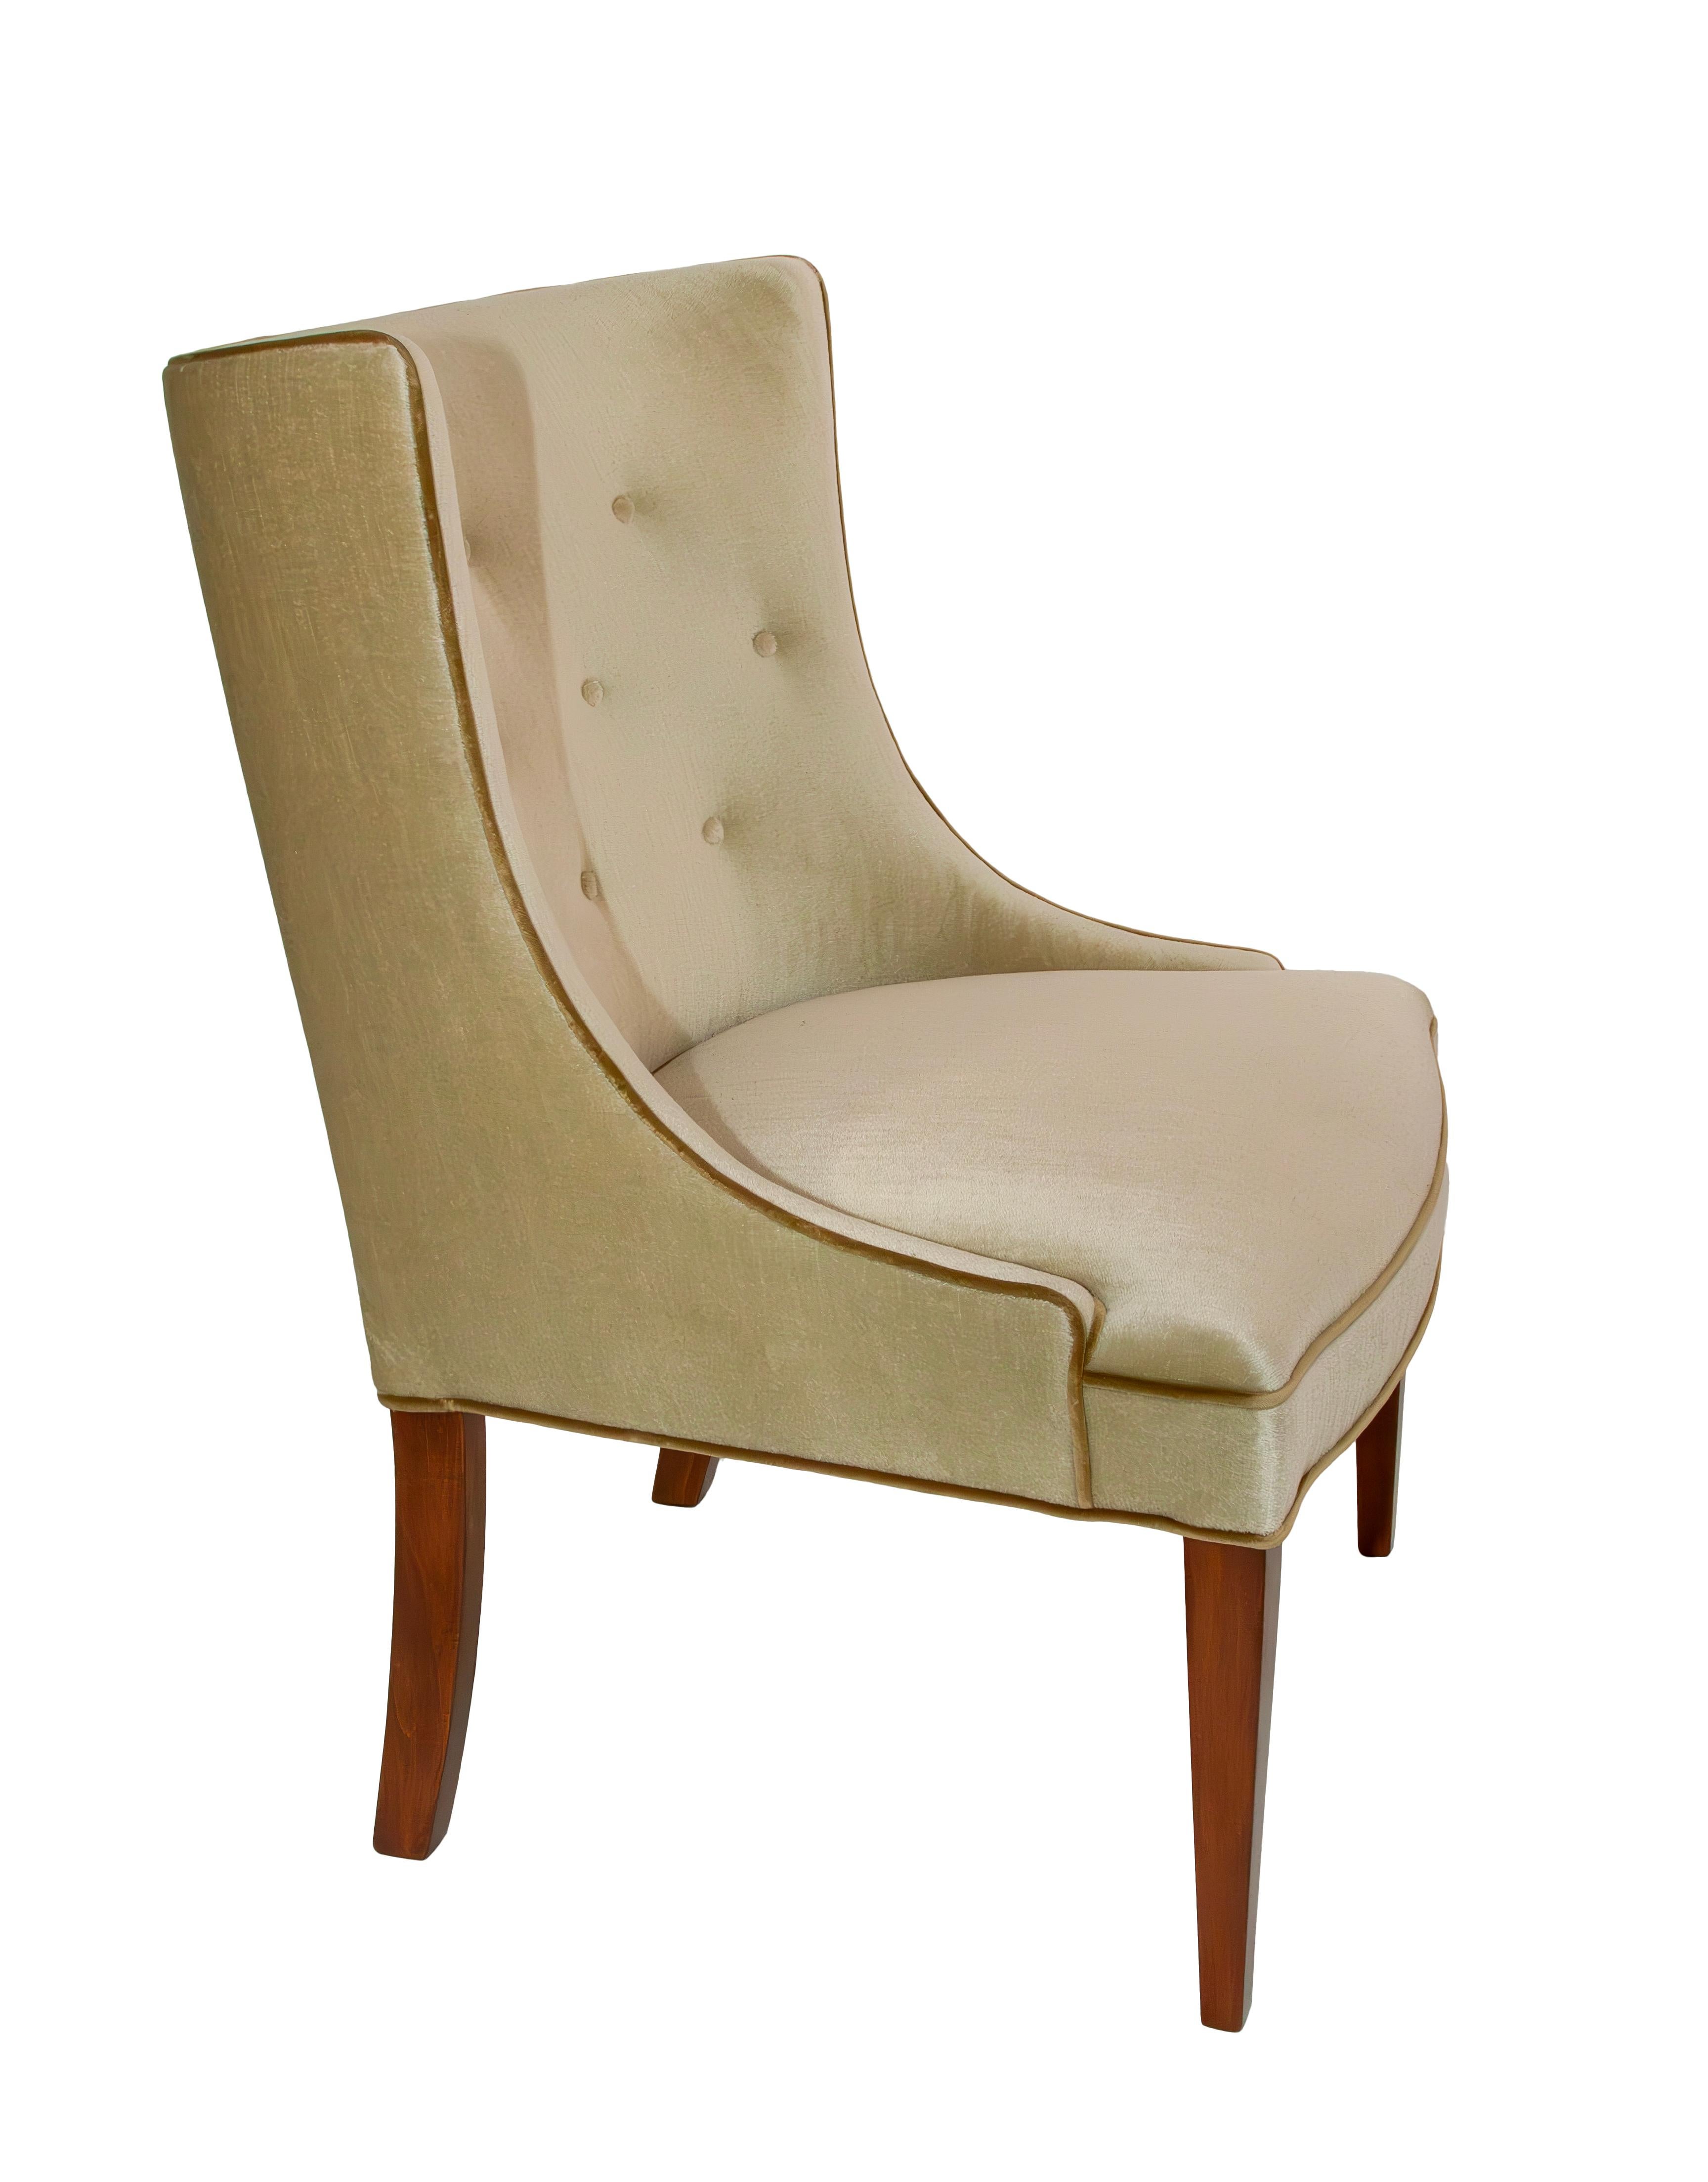 American  Dining Chair 1940's style  with Concave Tufted Back and Tapered alder Legs For Sale